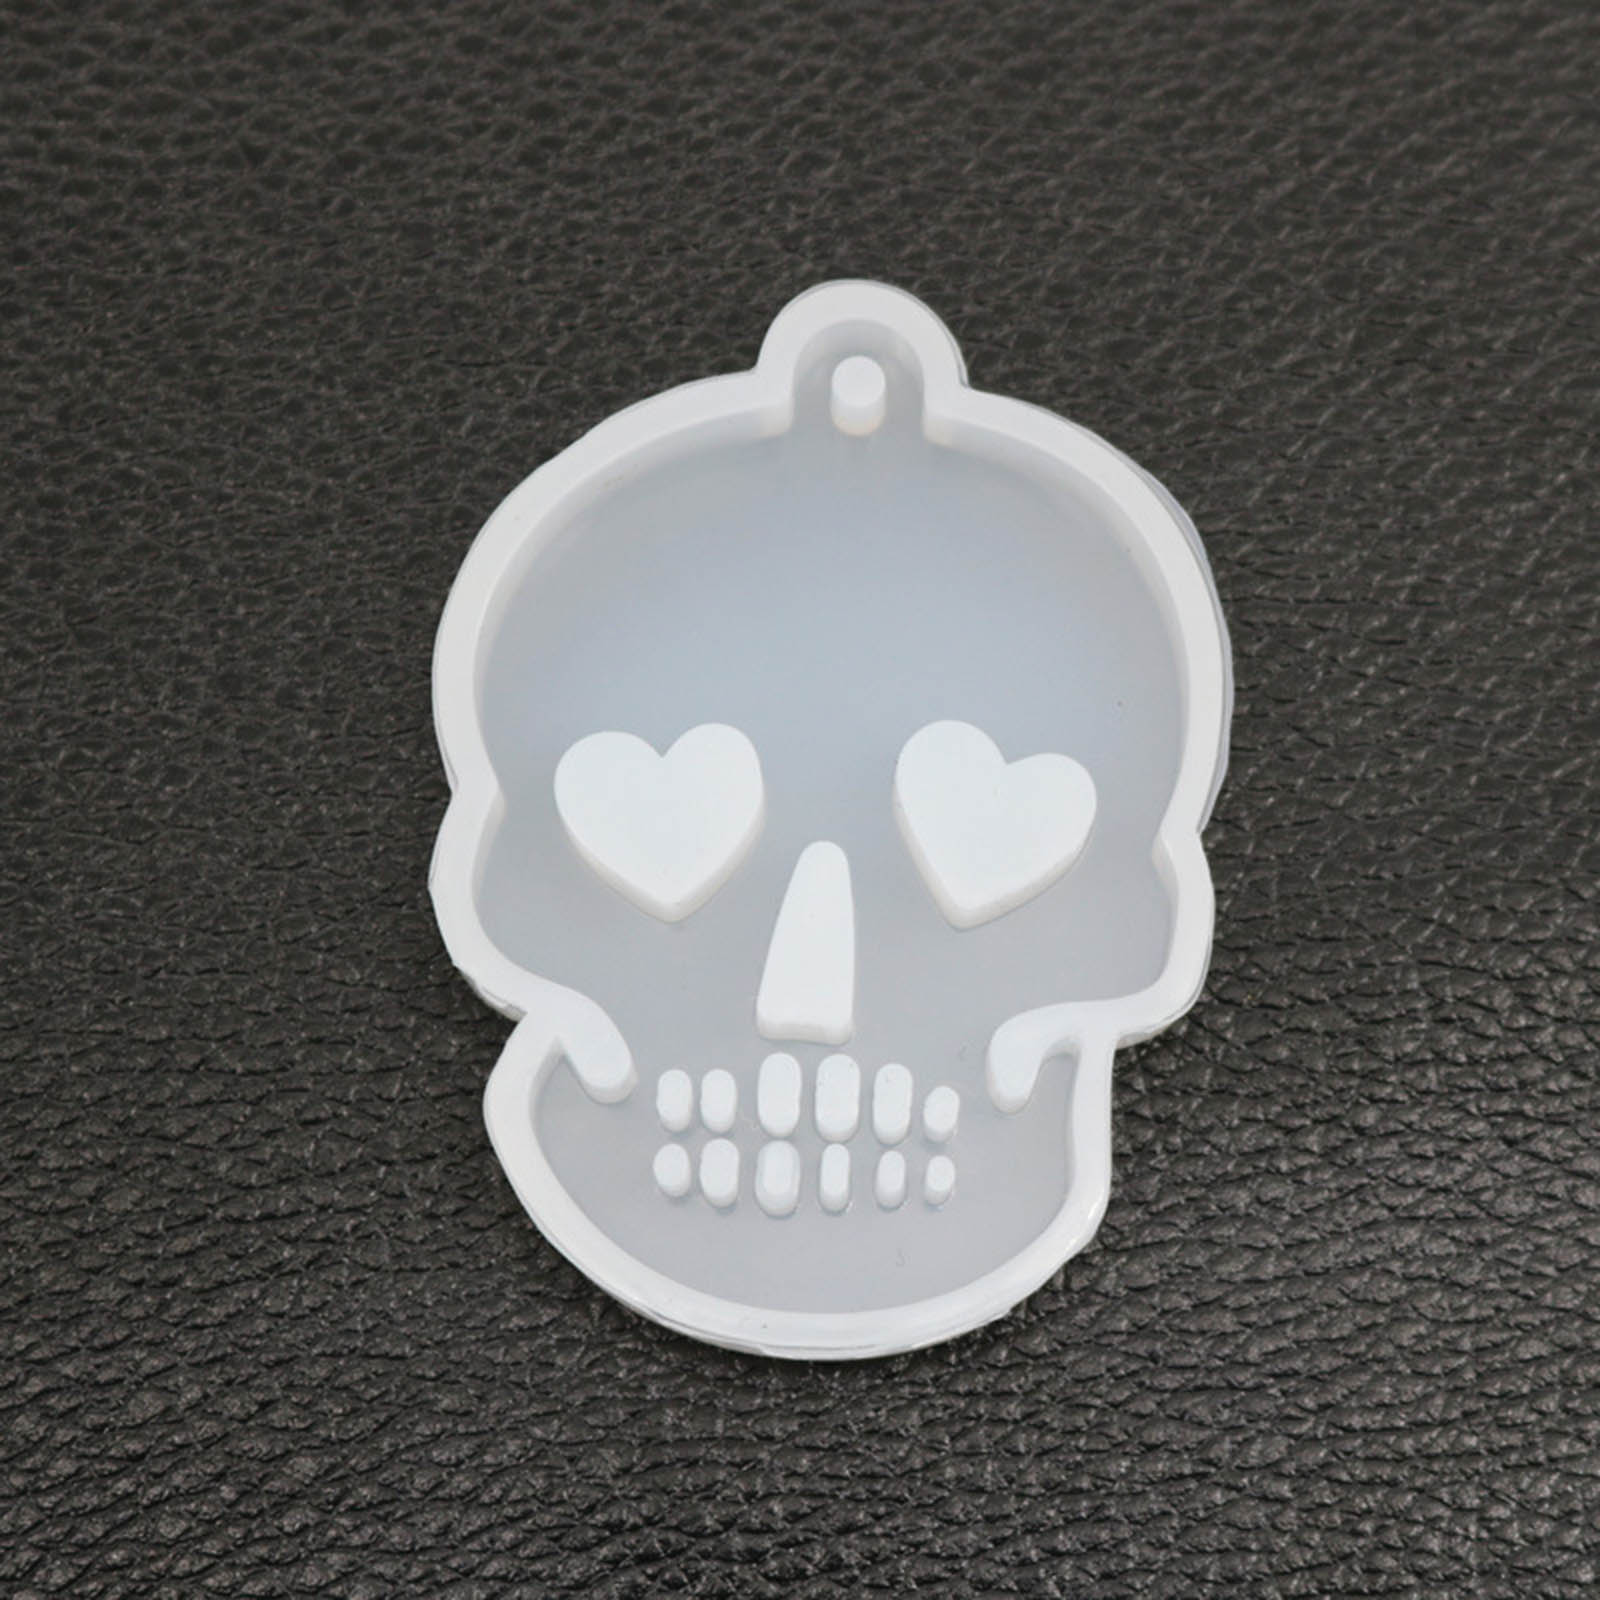 Picture of Silicone Resin Mold For Jewelry Making Pendant Skull Heart White 5.6cm x 4.1cm, 1 Piece